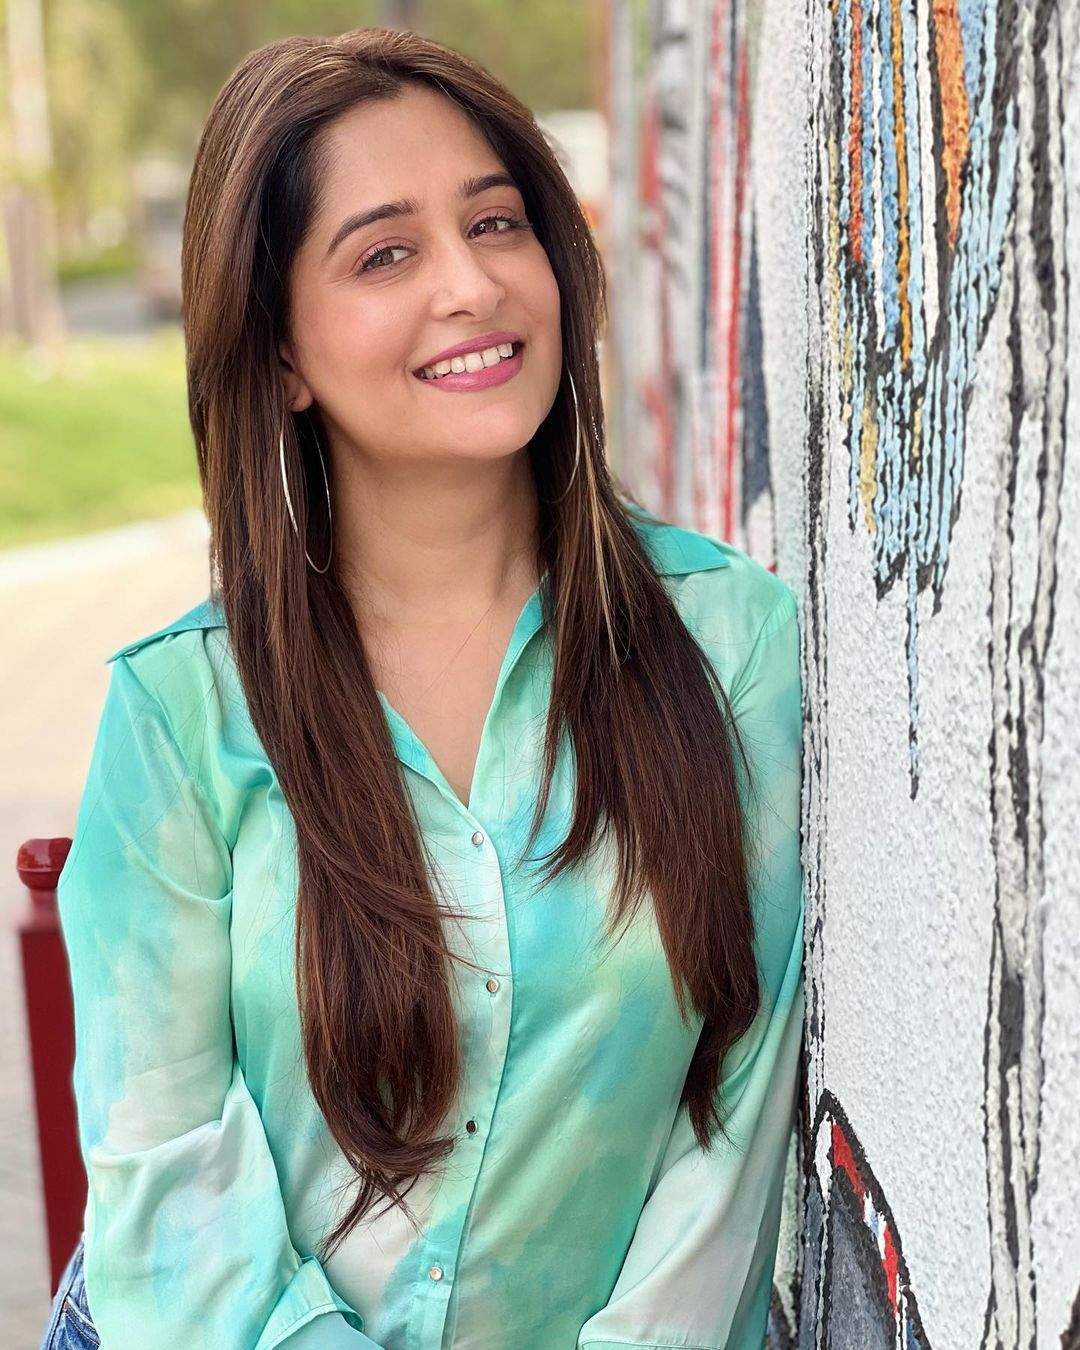 Exclusive - Dipika Kakar Alerts Her Fans About Cash-On-Delivery Scam; She Says, “Be Careful Guys, If You Do Not Place Any Orders, Then Don’t Take The Parcel”!